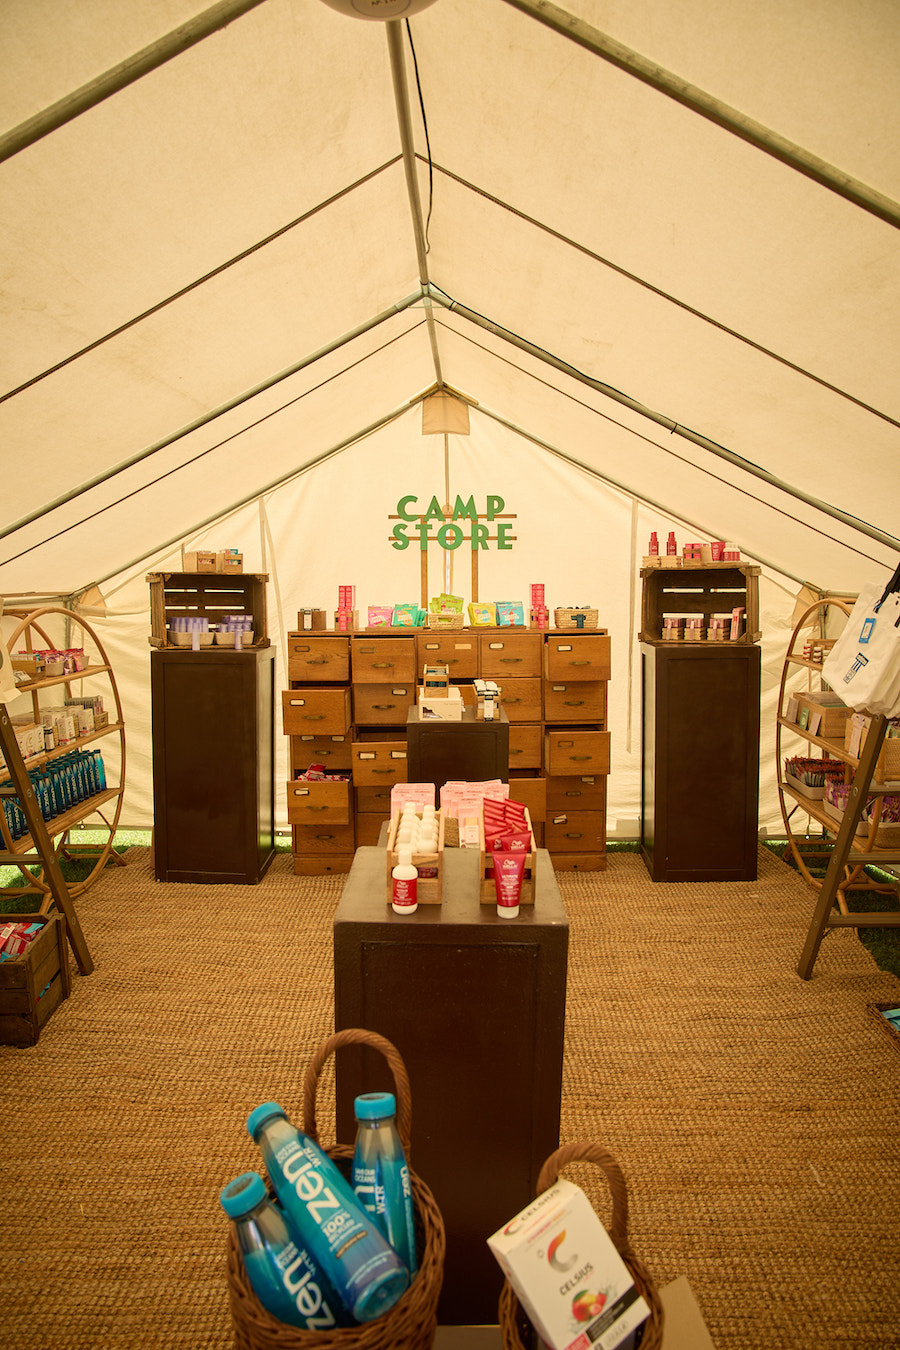 The camp store tent filled with products